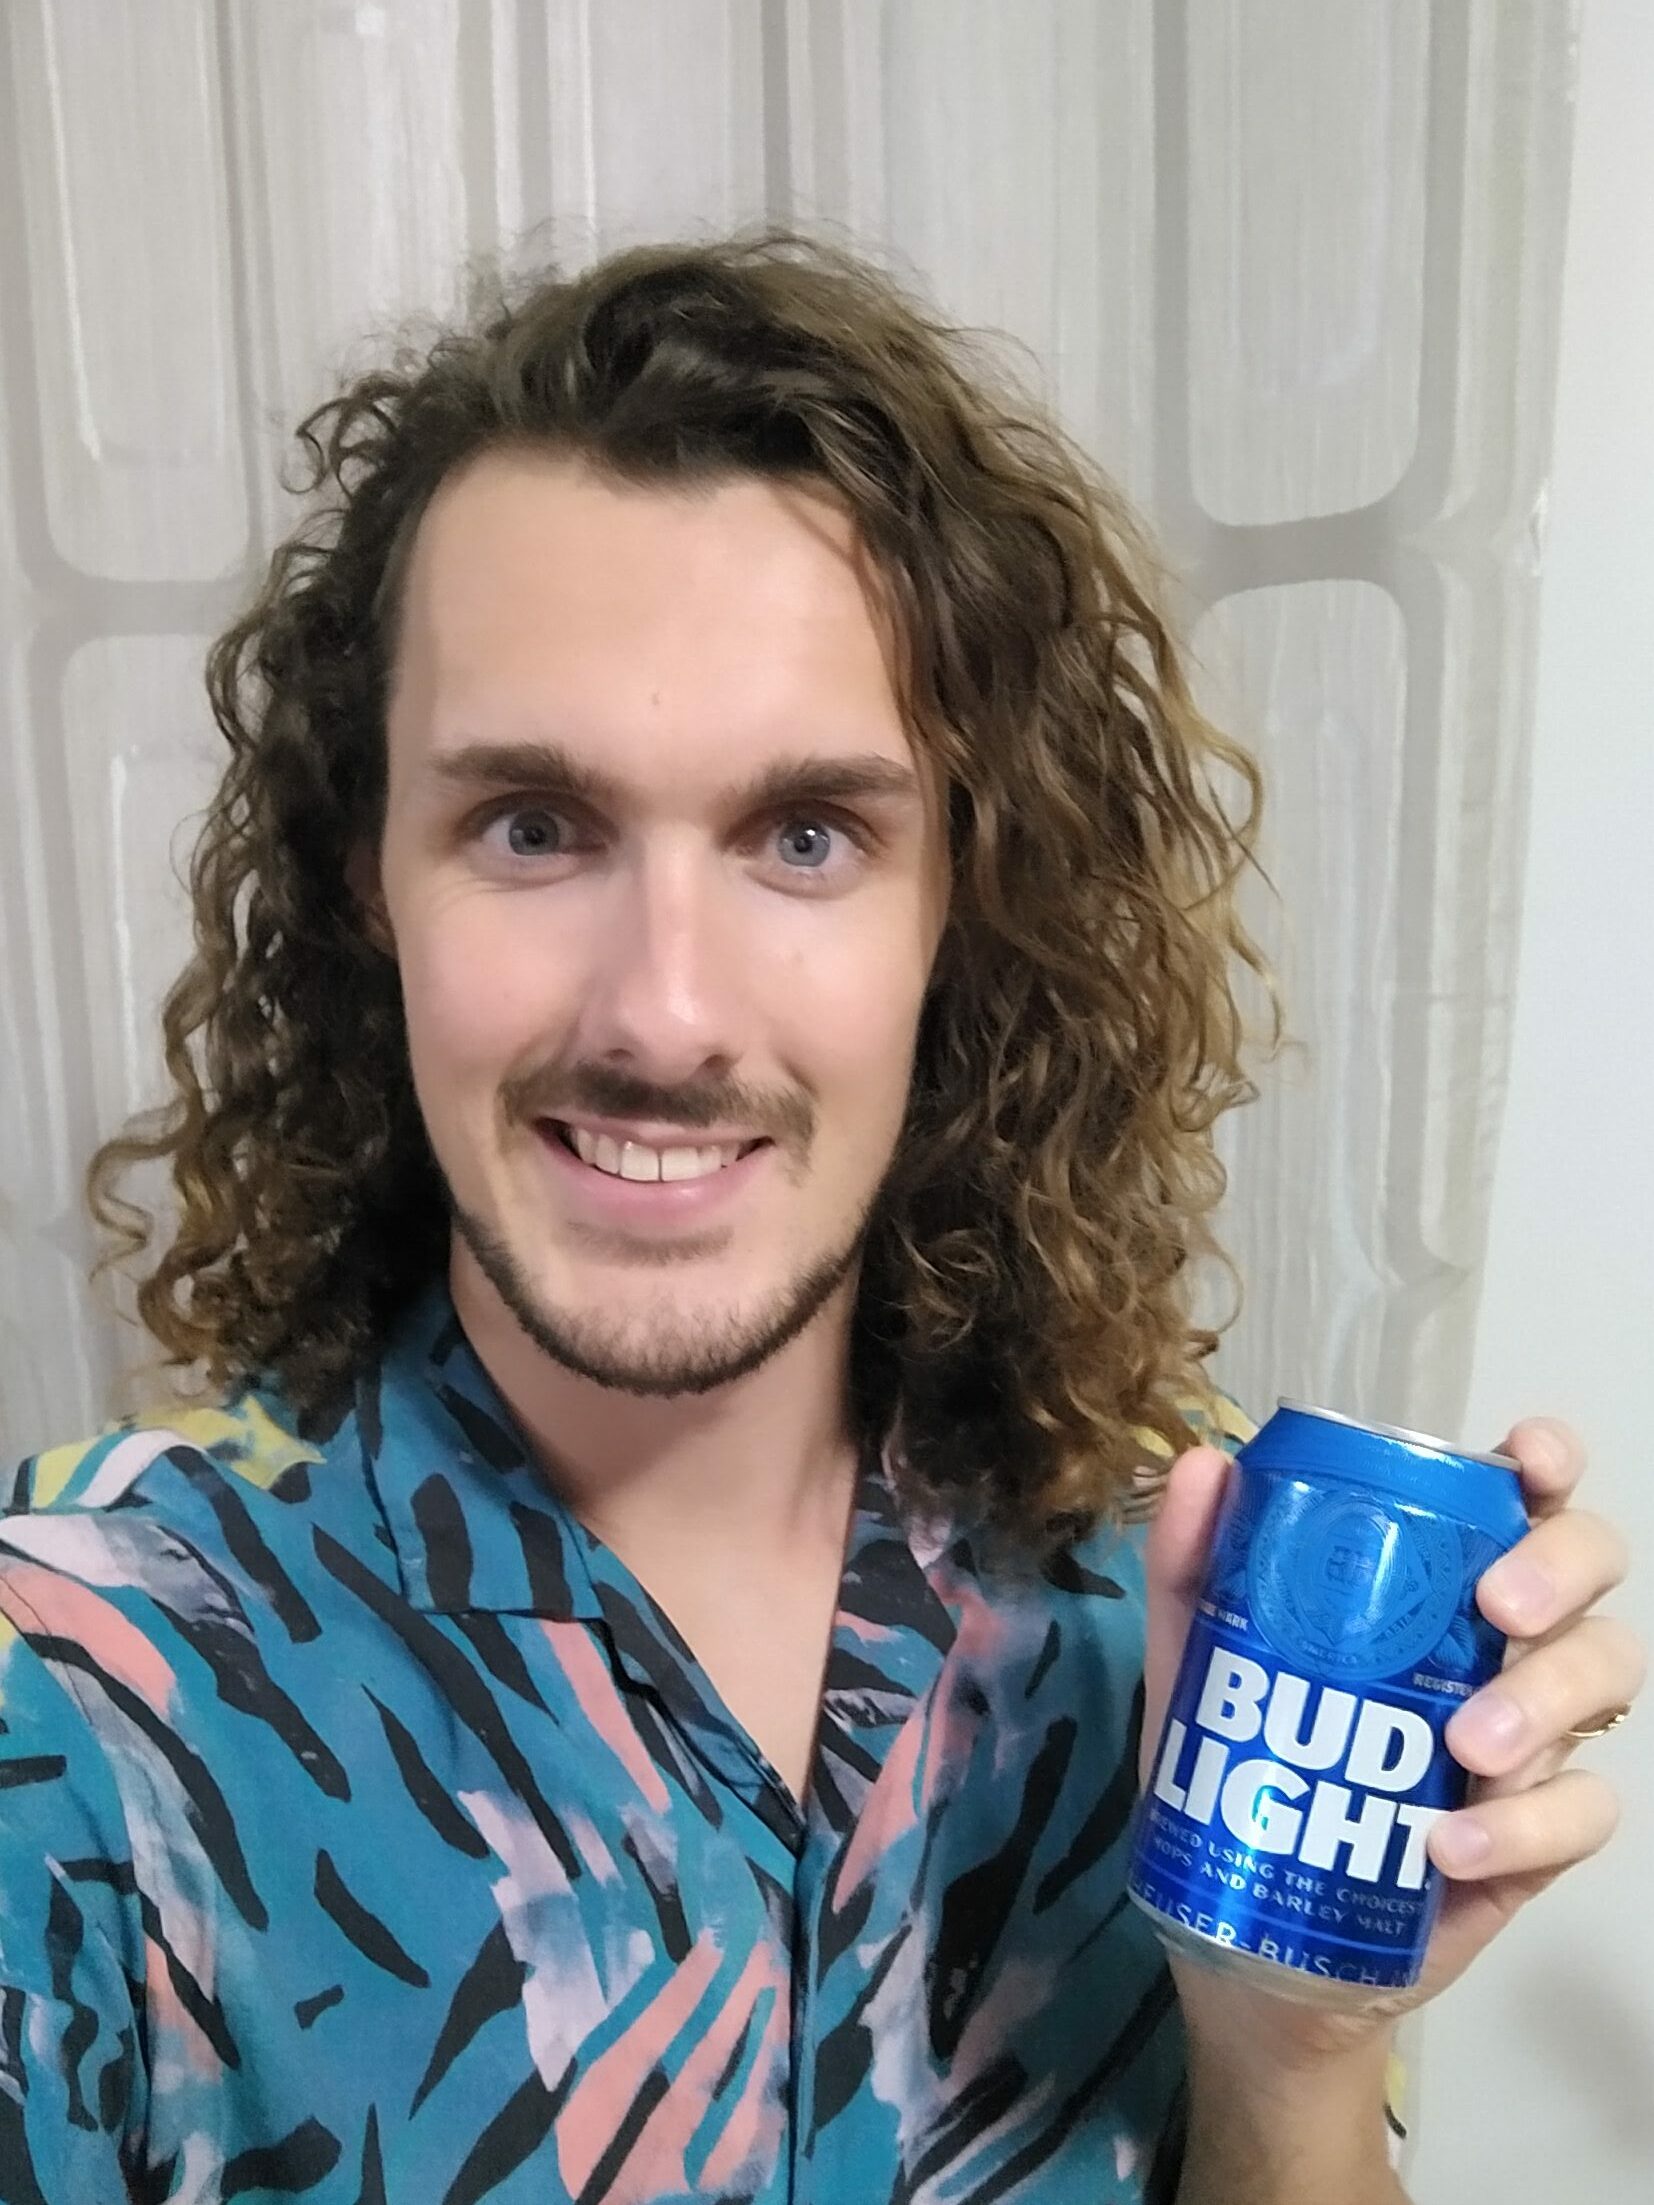 Stefan, the founder of Beveragebeaver.com, holding a can of bud light